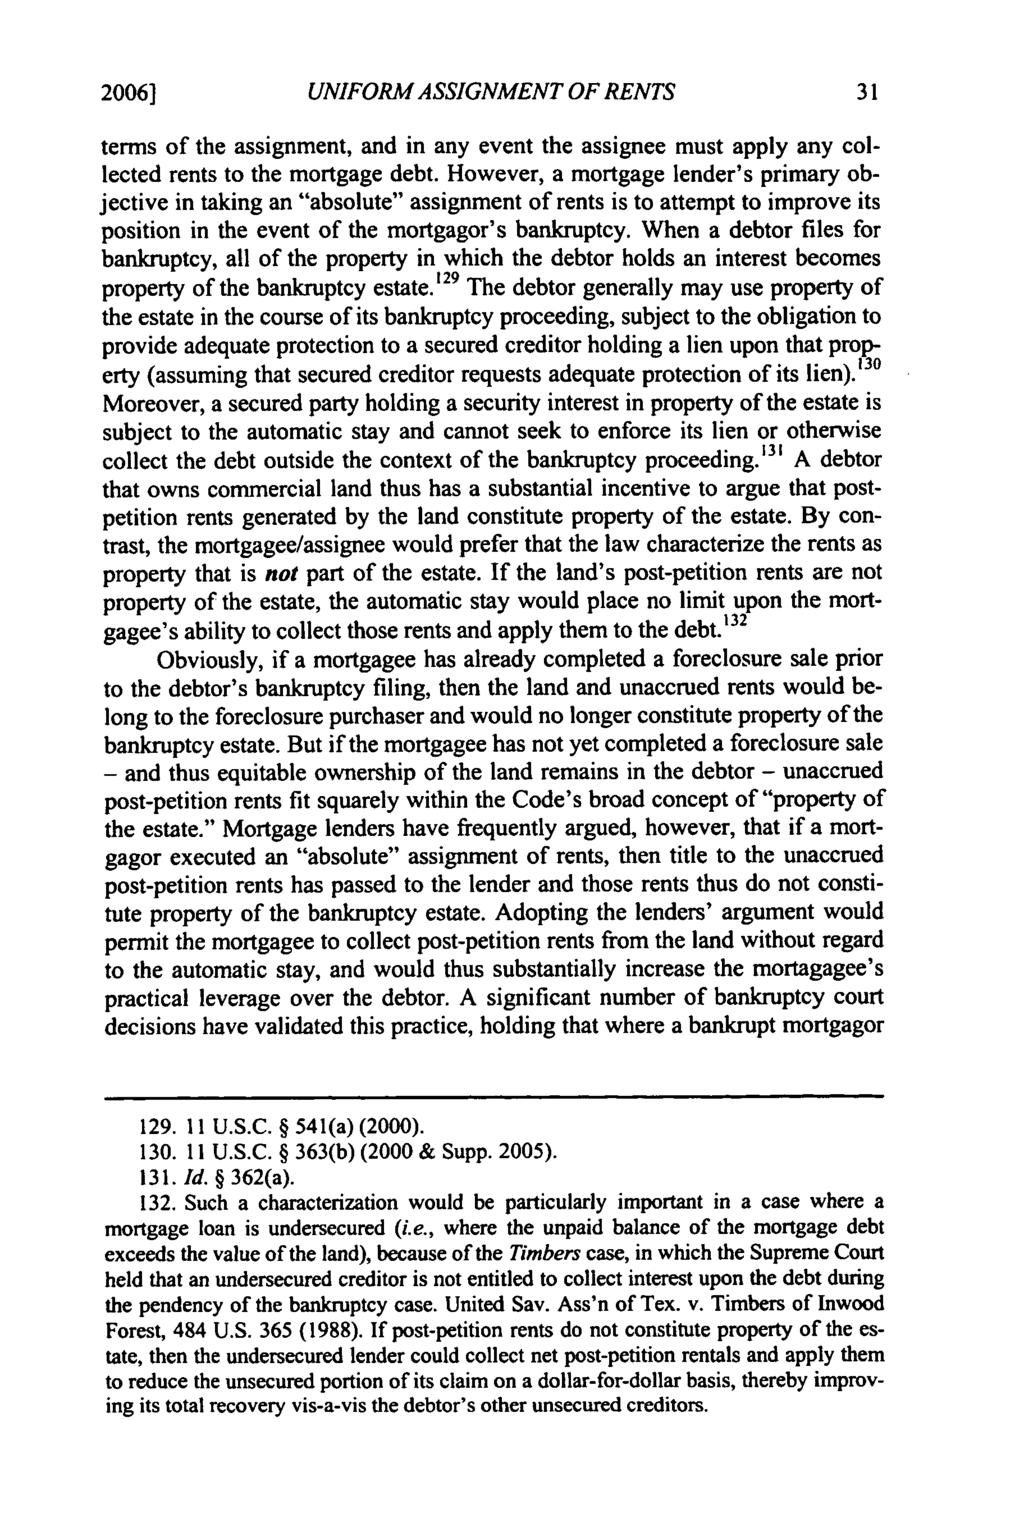 2006] Freyermuth: Freyermuth: Modernizing Security in Rents UNIFORM ASSIGNMENT OF RENTS terms of the assignment, and in any event the assignee must apply any collected rents to the mortgage debt.